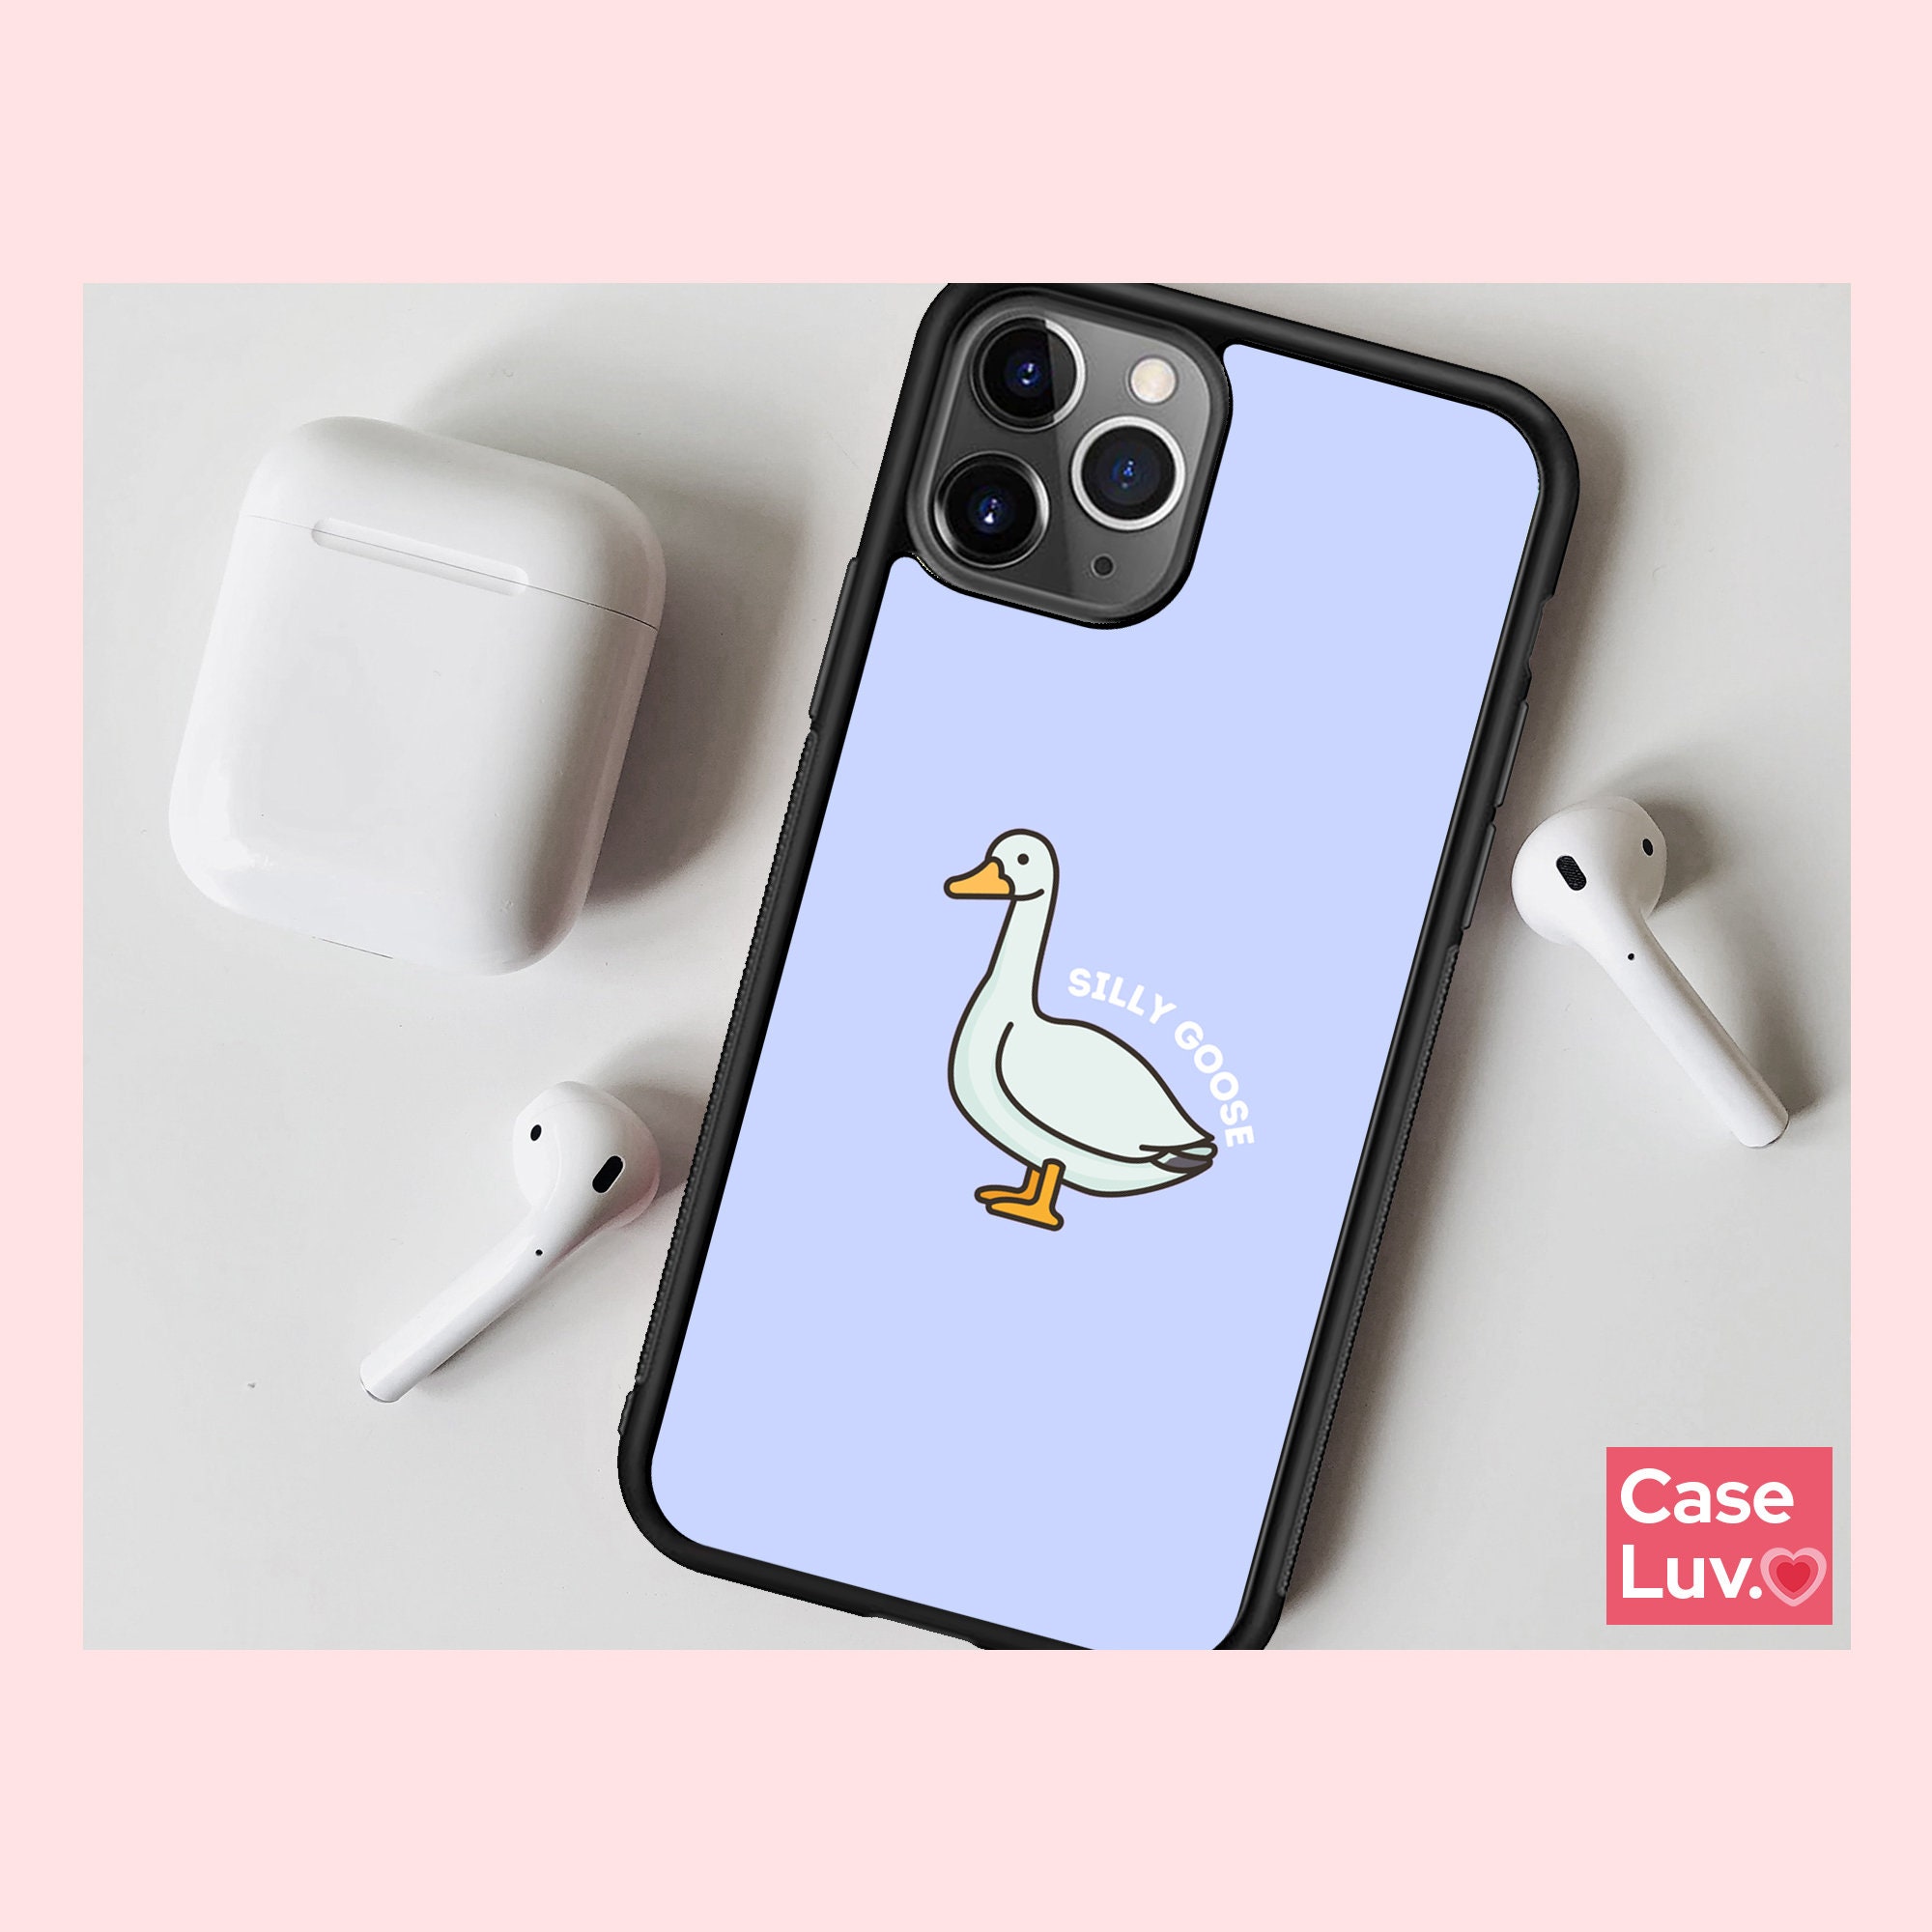  Trendy Fun for iPhone 13 Pro Max Case Silicone Aesthetic  Cartoon Funny Cute Cool Fidget Unique Stylish Designer Fun Trendy Cover  Cases for Boys Girls Women Color Micy for iPhone 13